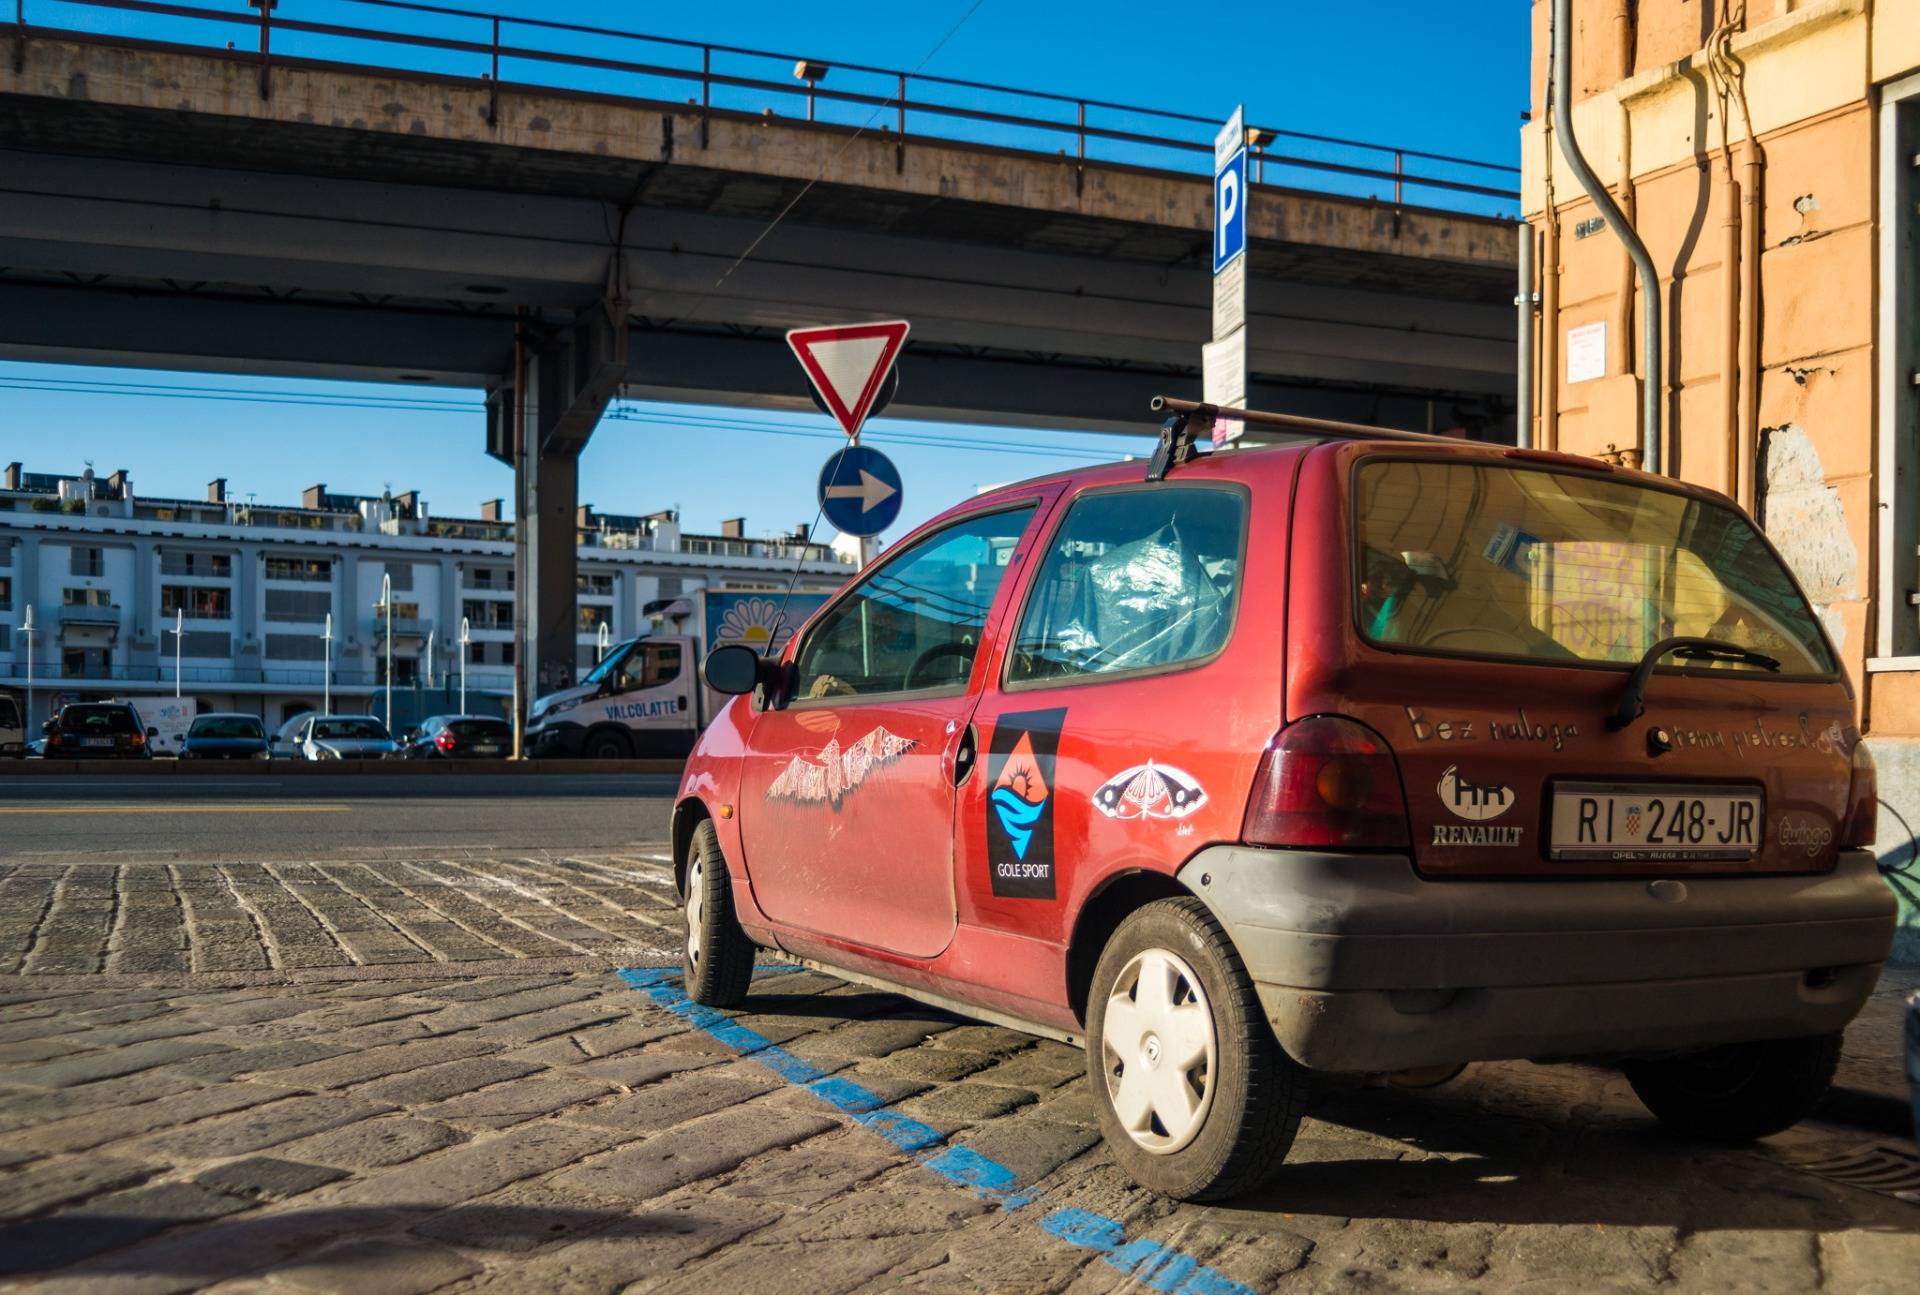 My Twingo jet parked close to the port in Genova, December 2019